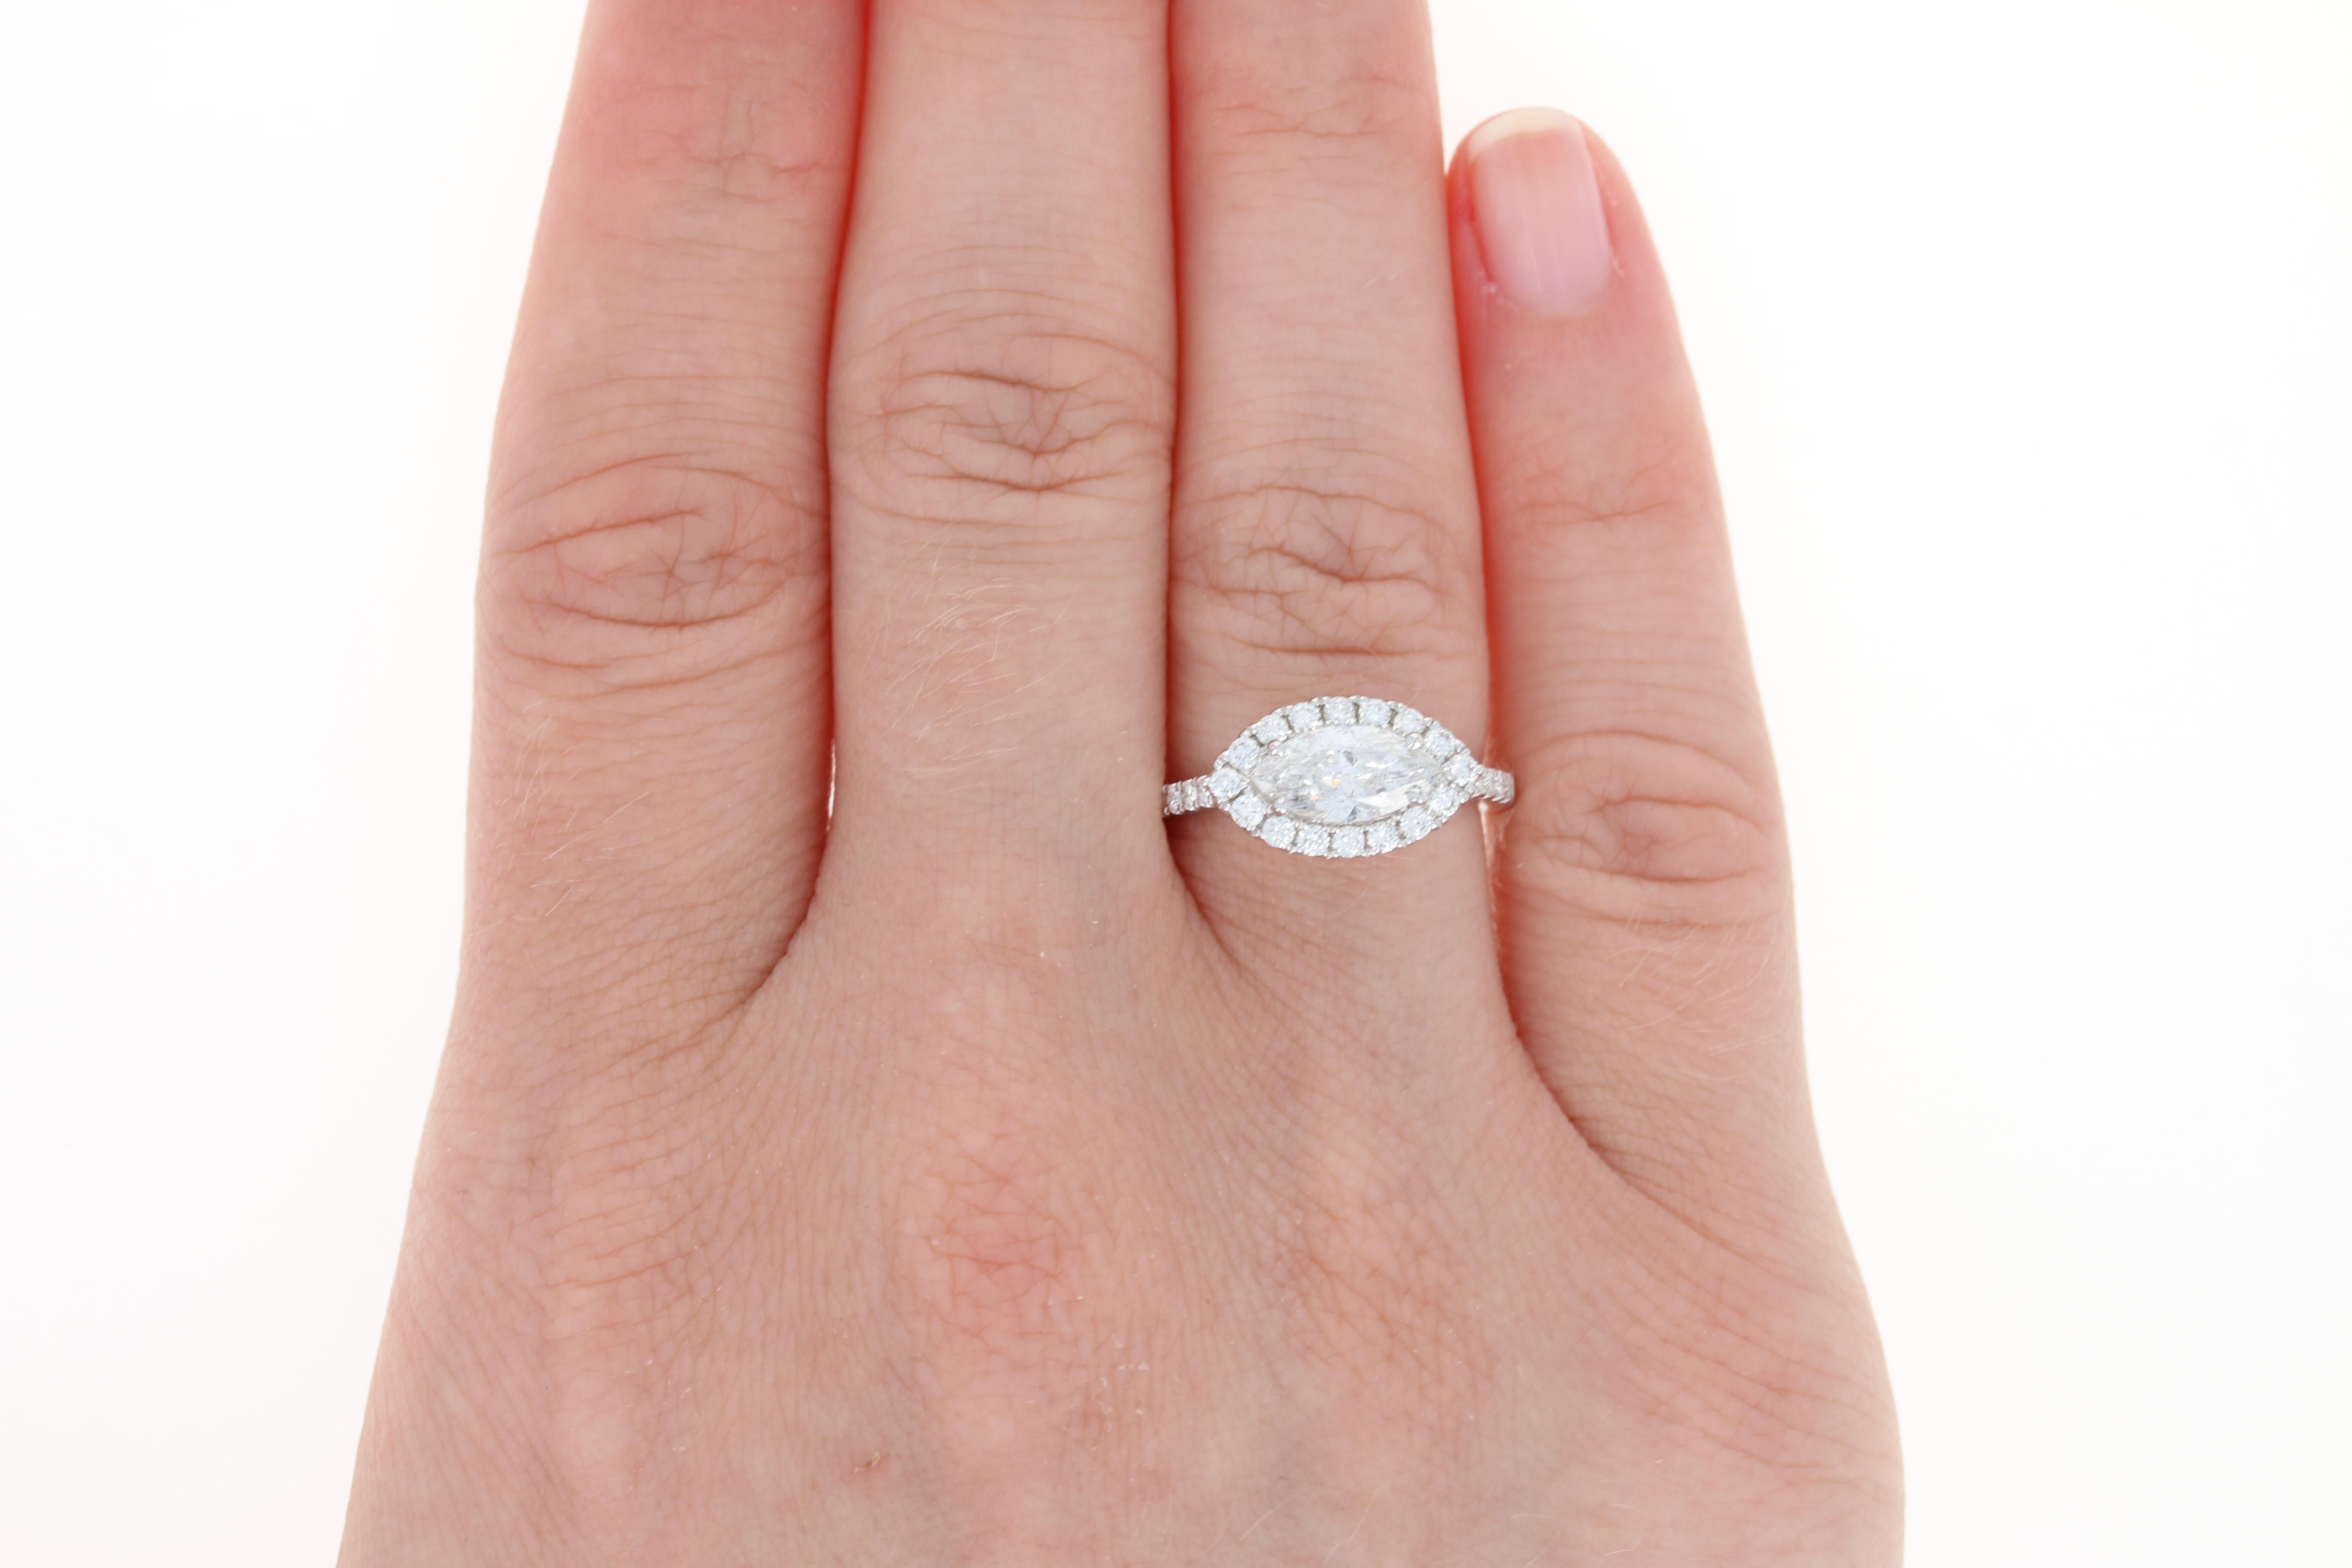 Celebrate your fairy tale love story with this exquisite NEW engagement ring and wedding band! Showcasing a halo-style design, this 14k white gold bridal set is illuminated by the engagement ring’s GIA-graded marquise diamond solitaire and the